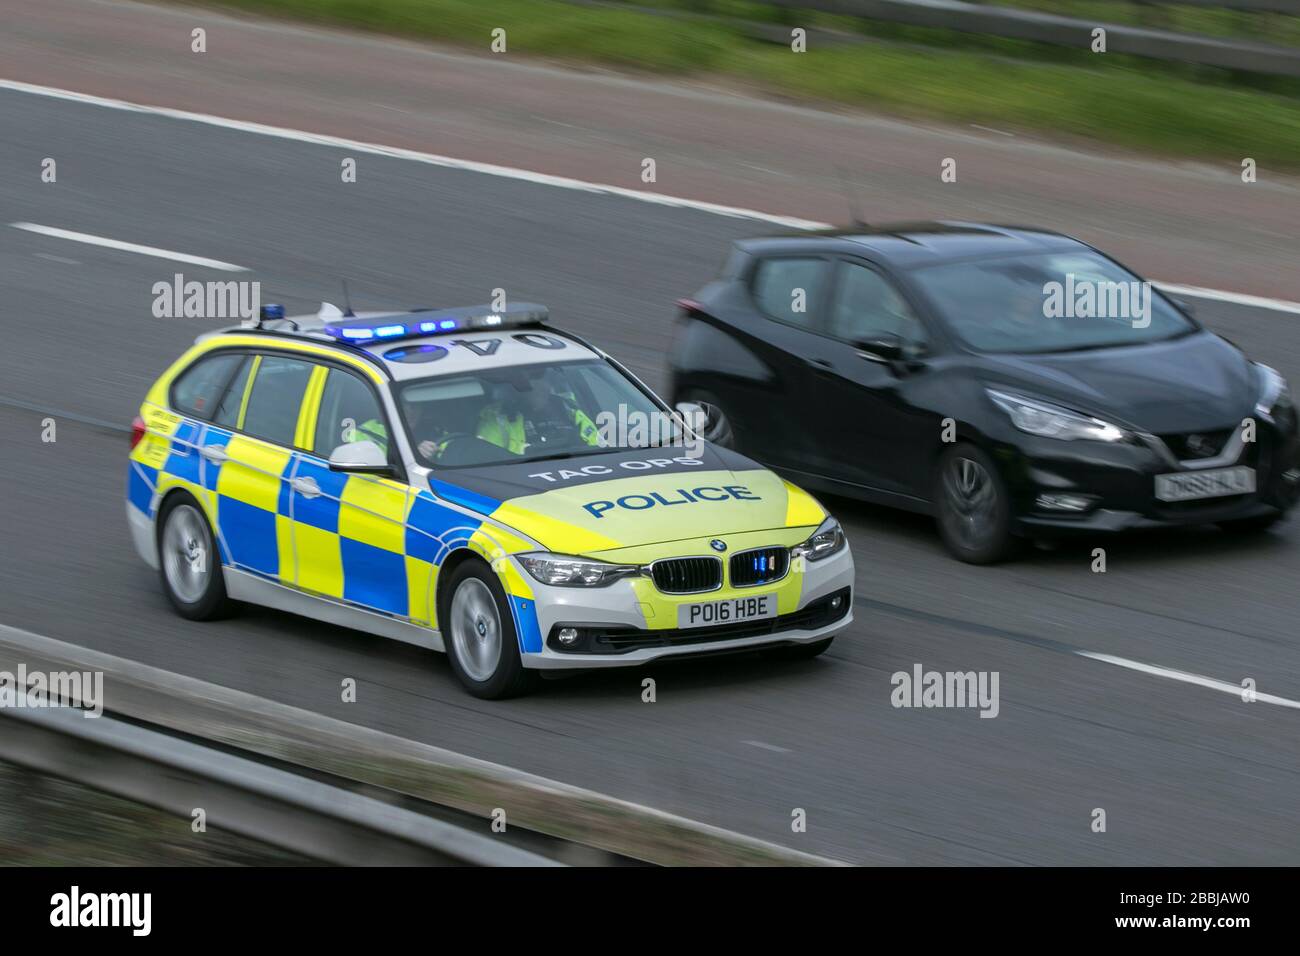 A TAC OPS BMW police car speeding to an emergency on the M6 motorway near Preston in Lancashire Stock Photo